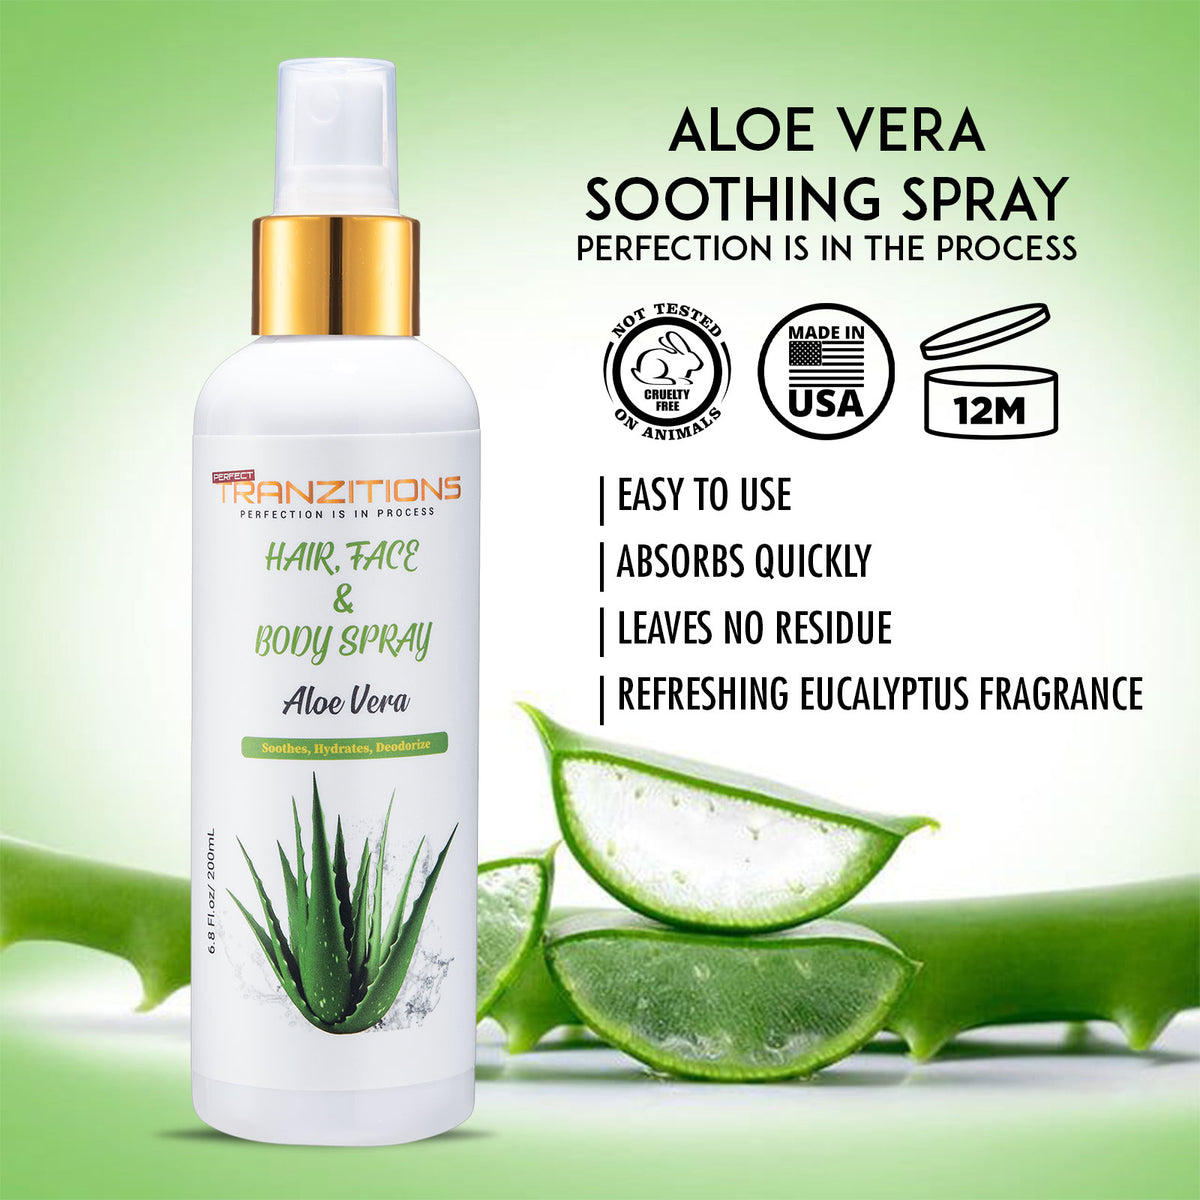 Pure Aloe Vera Spray For For Use As Tonic, Spray For Dreadlocks, Perfect For Acne And Other Skin Blemishes, Aloe Vera Hair Spray